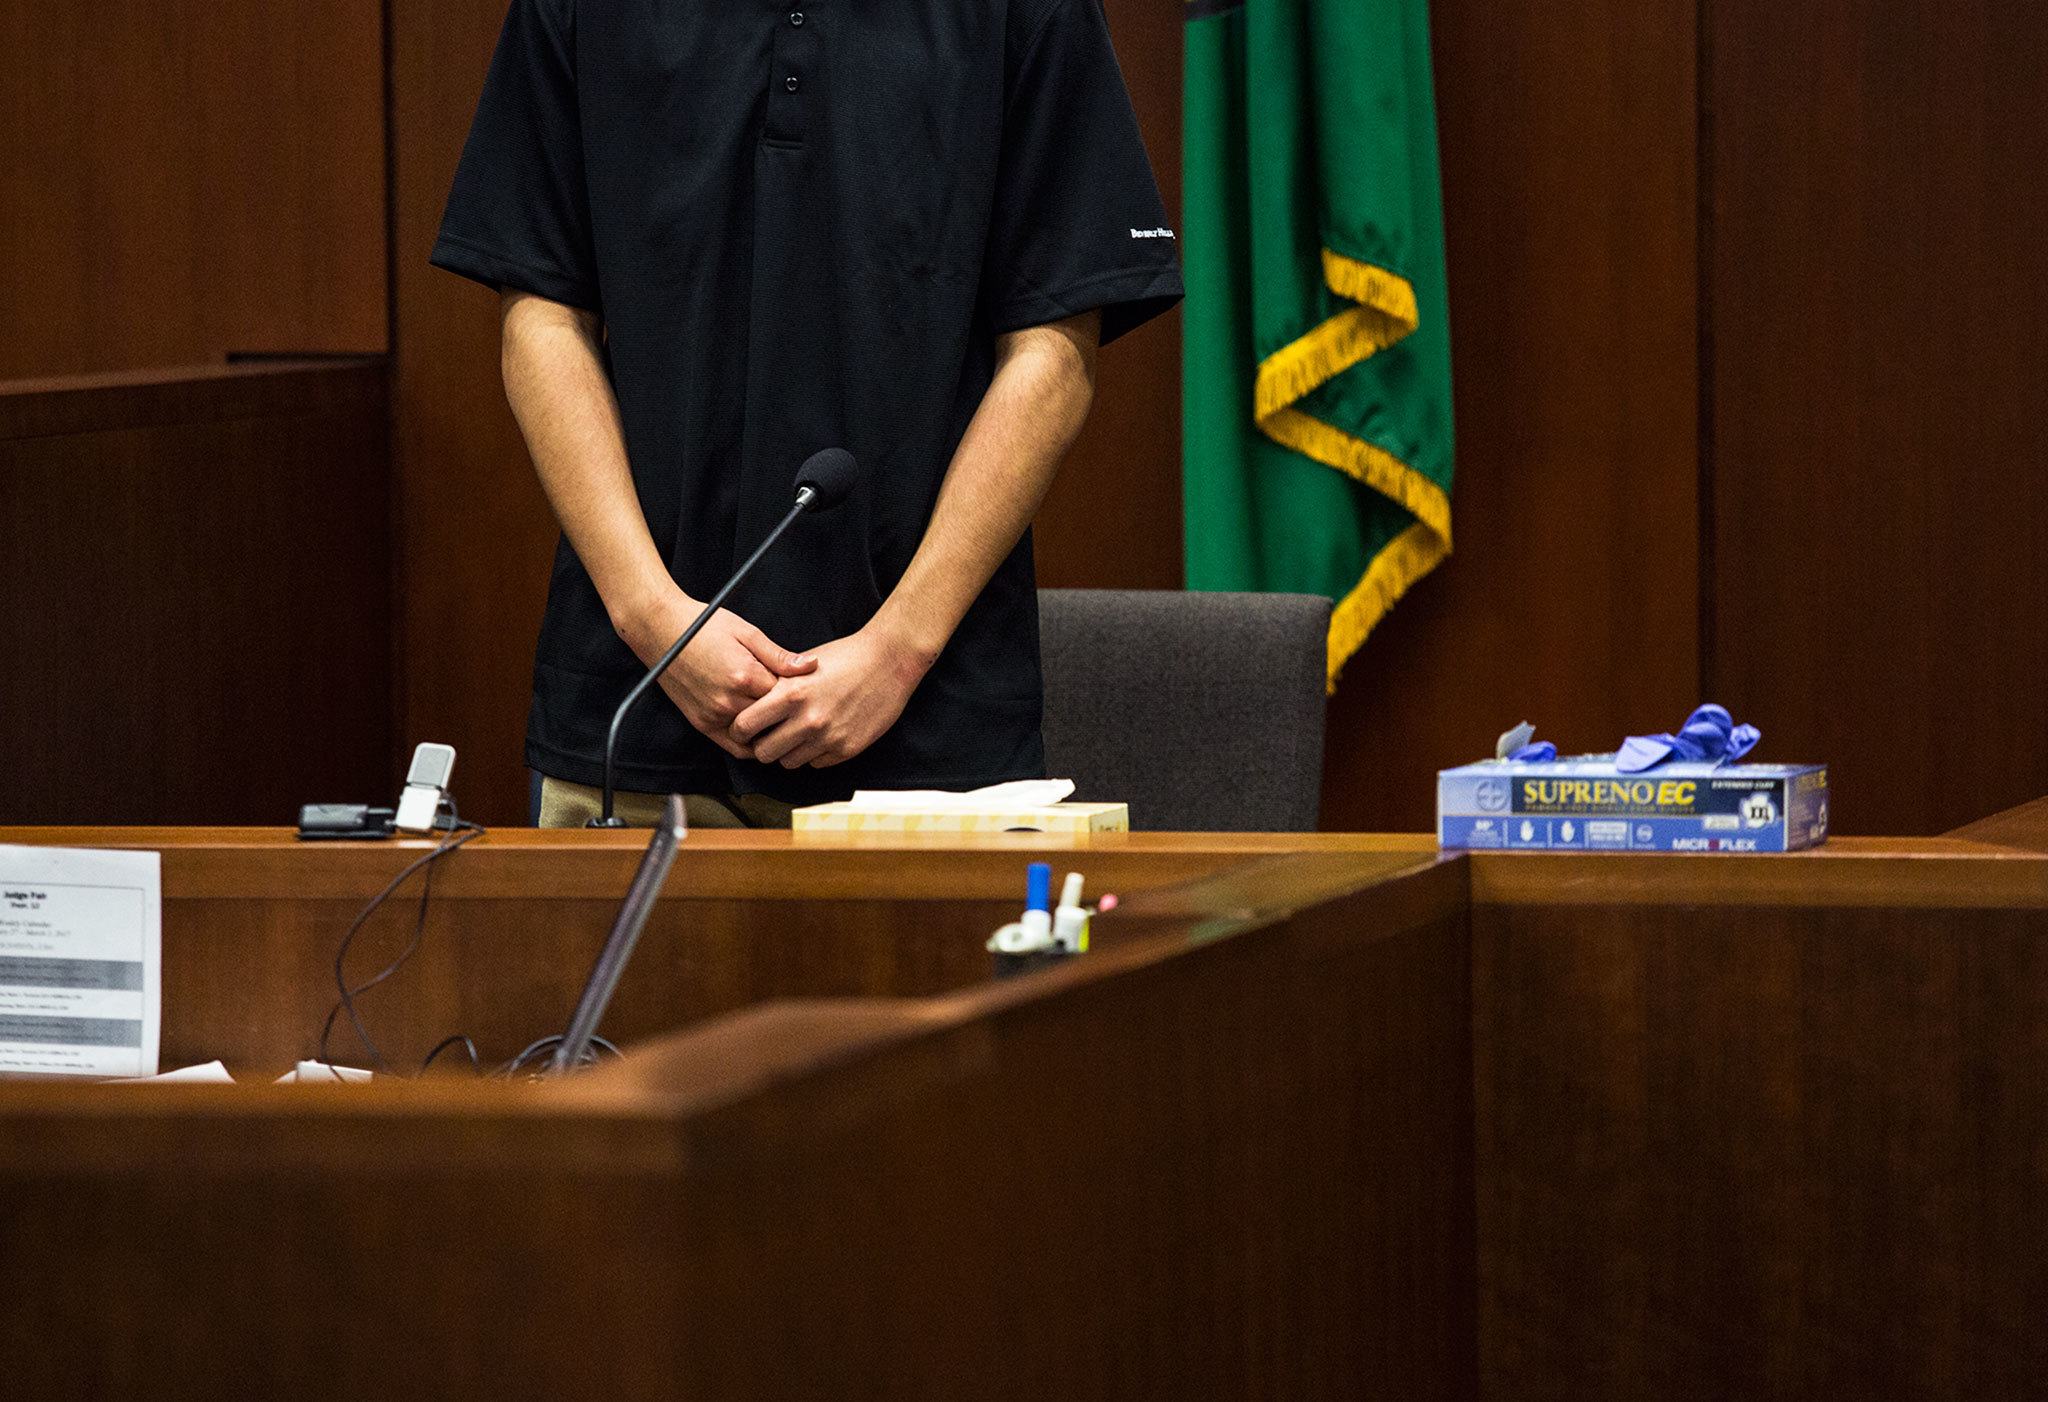 Guillermo Padilla, 17, testifies at the Snohomish County Courthouse on Monday, Feb. 27 in Everett. Padilla, who pleaded guilty to second-degree murder in the shooting, told jurors that Diego Tavares took Padilla’s .22-caliber gun the morning Anthony Camacho was shot to death. (Daniella Beccaria / The Herald)